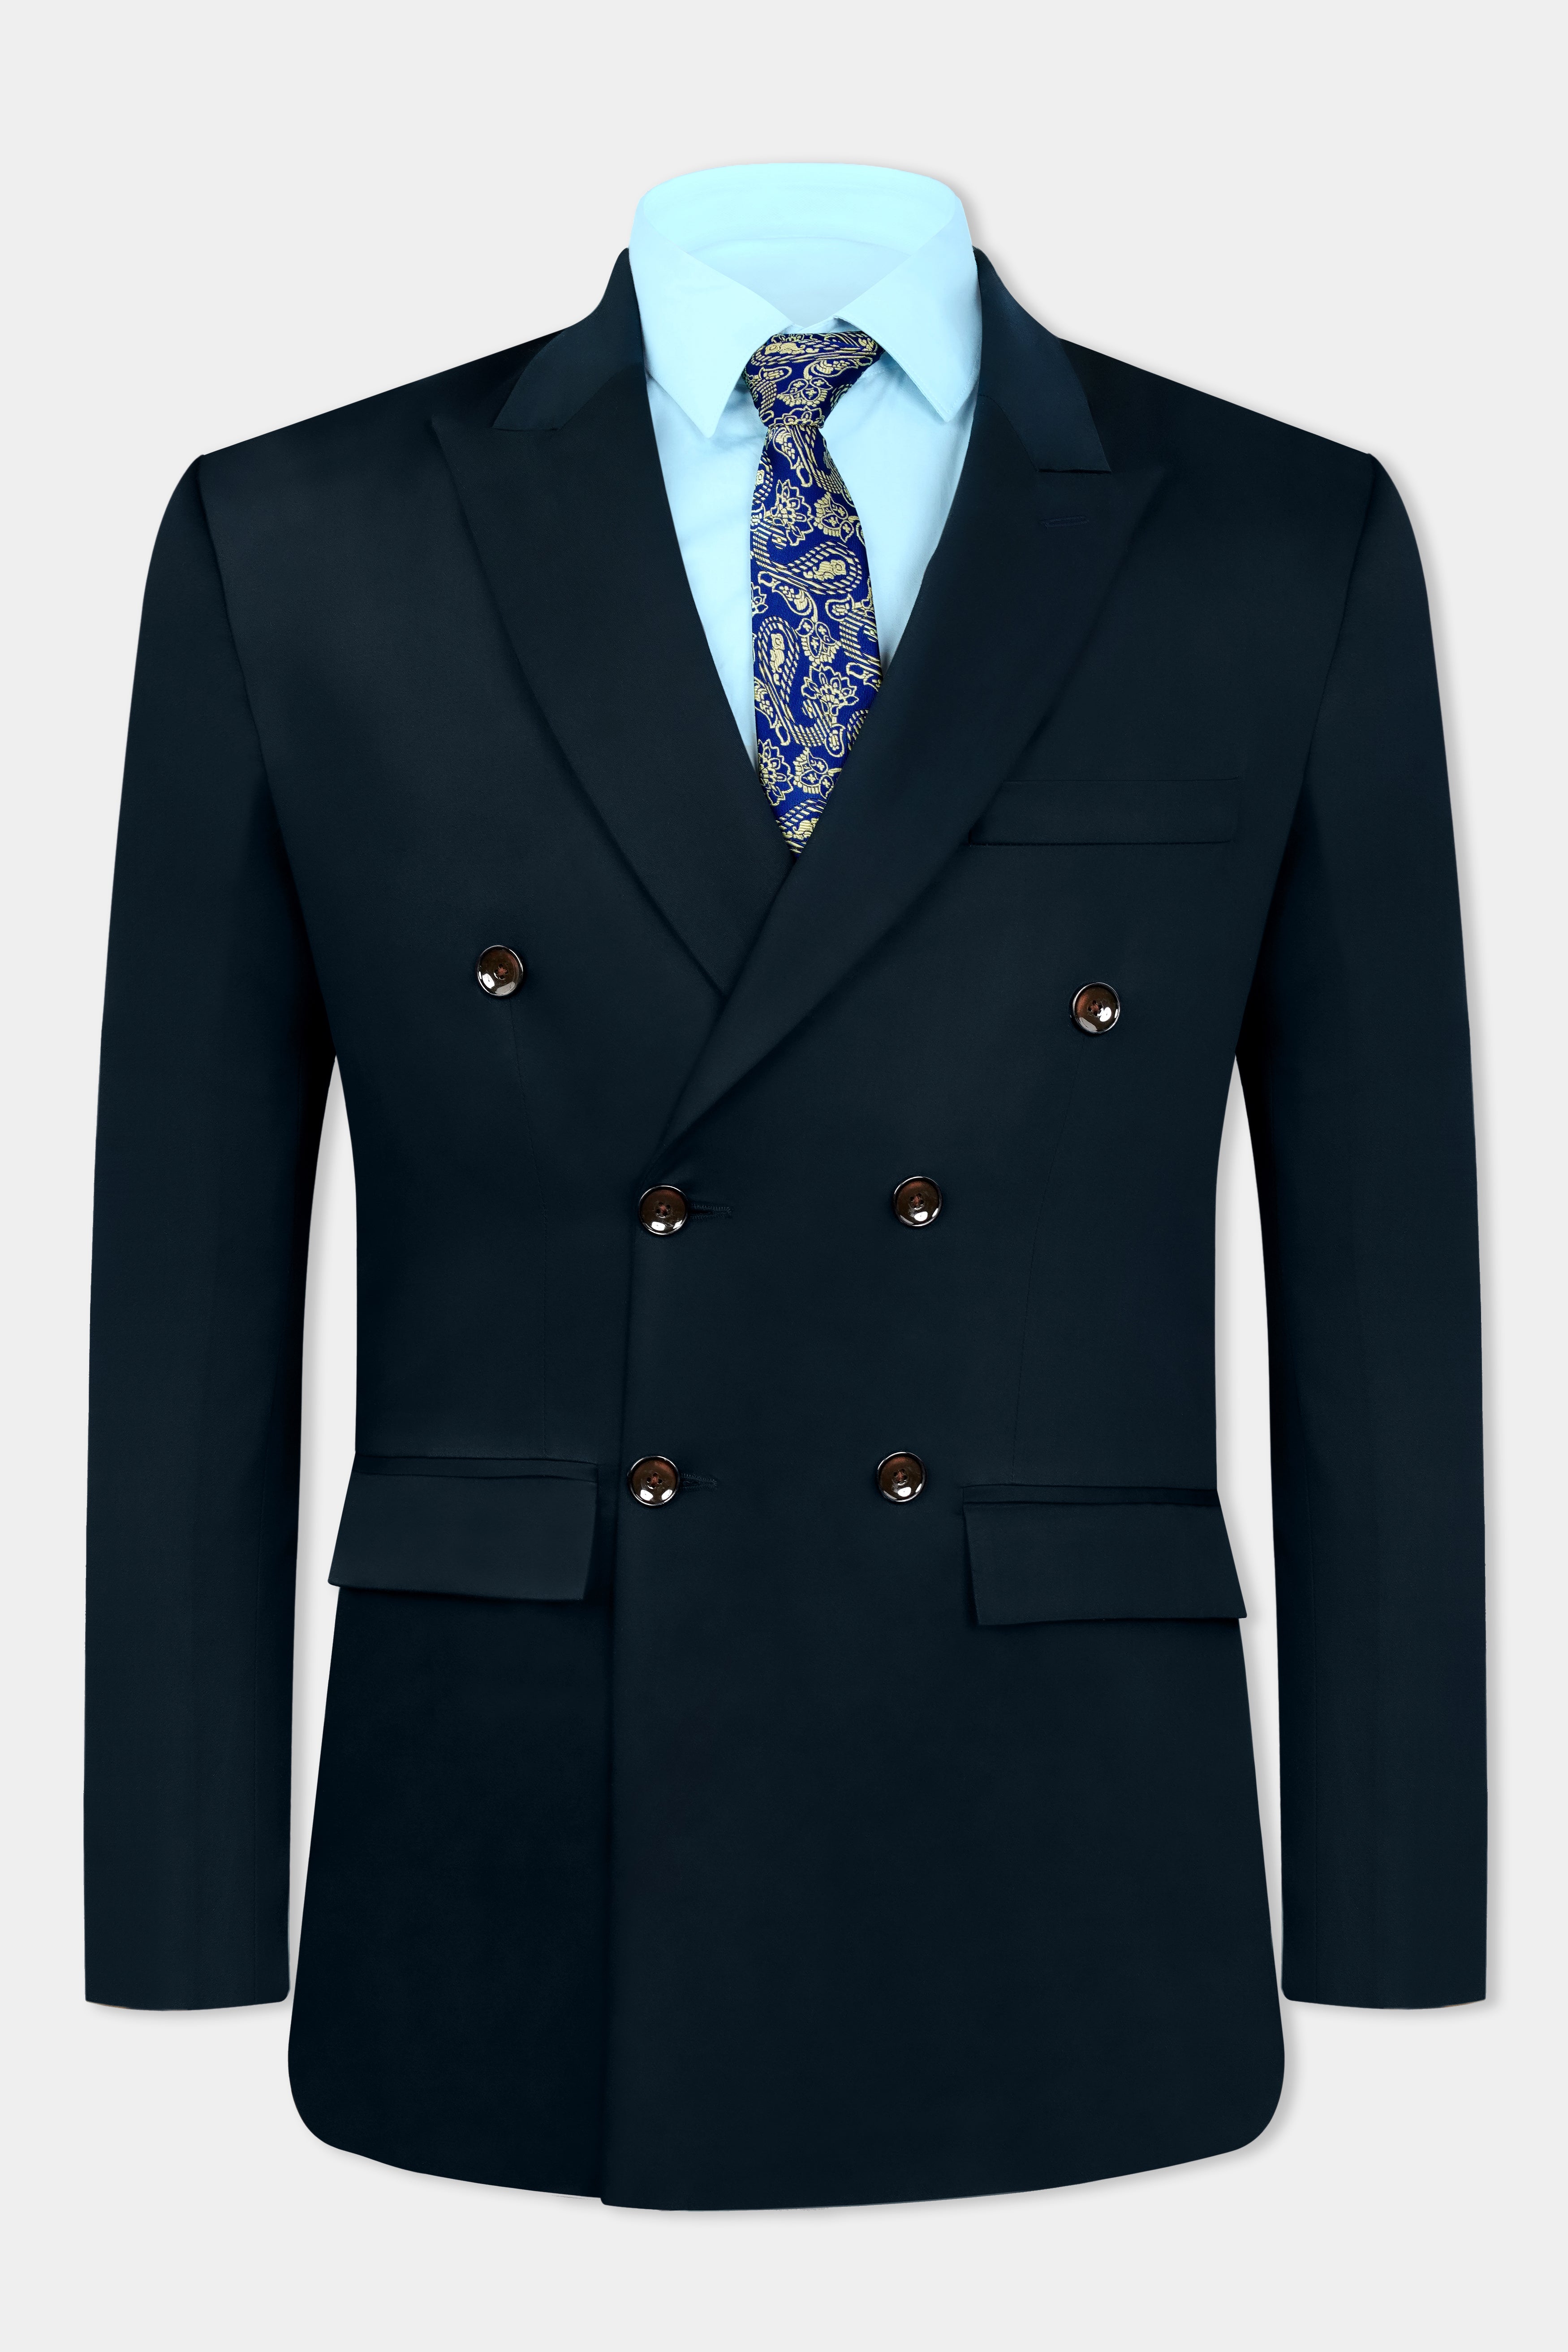 Bunker Blue Premium Cotton Double Breasted Blazer BL3115-DB-36, BL3115-DB-38, BL3115-DB-40, BL3115-DB-42, BL3115-DB-44, BL3115-DB-46, BL3115-DB-48, BL3115-DB-50, BL3115-DB-52, BL3115-DB-54, BL3115-DB-56, BL3115-DB-58, BL3115-DB-60